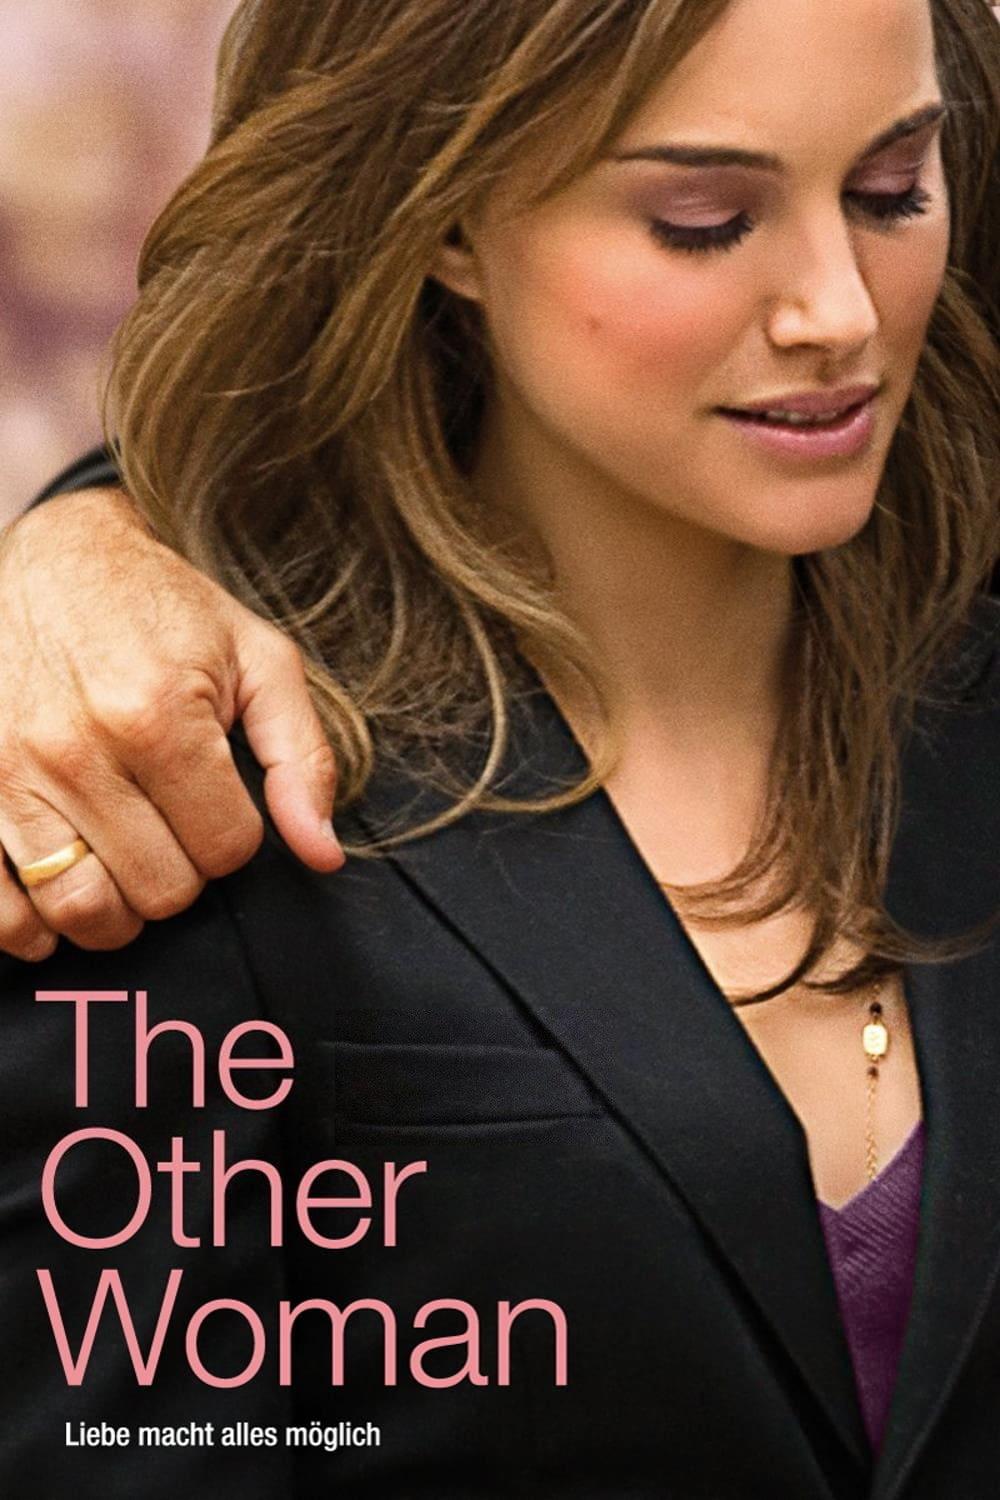 The Other Woman poster